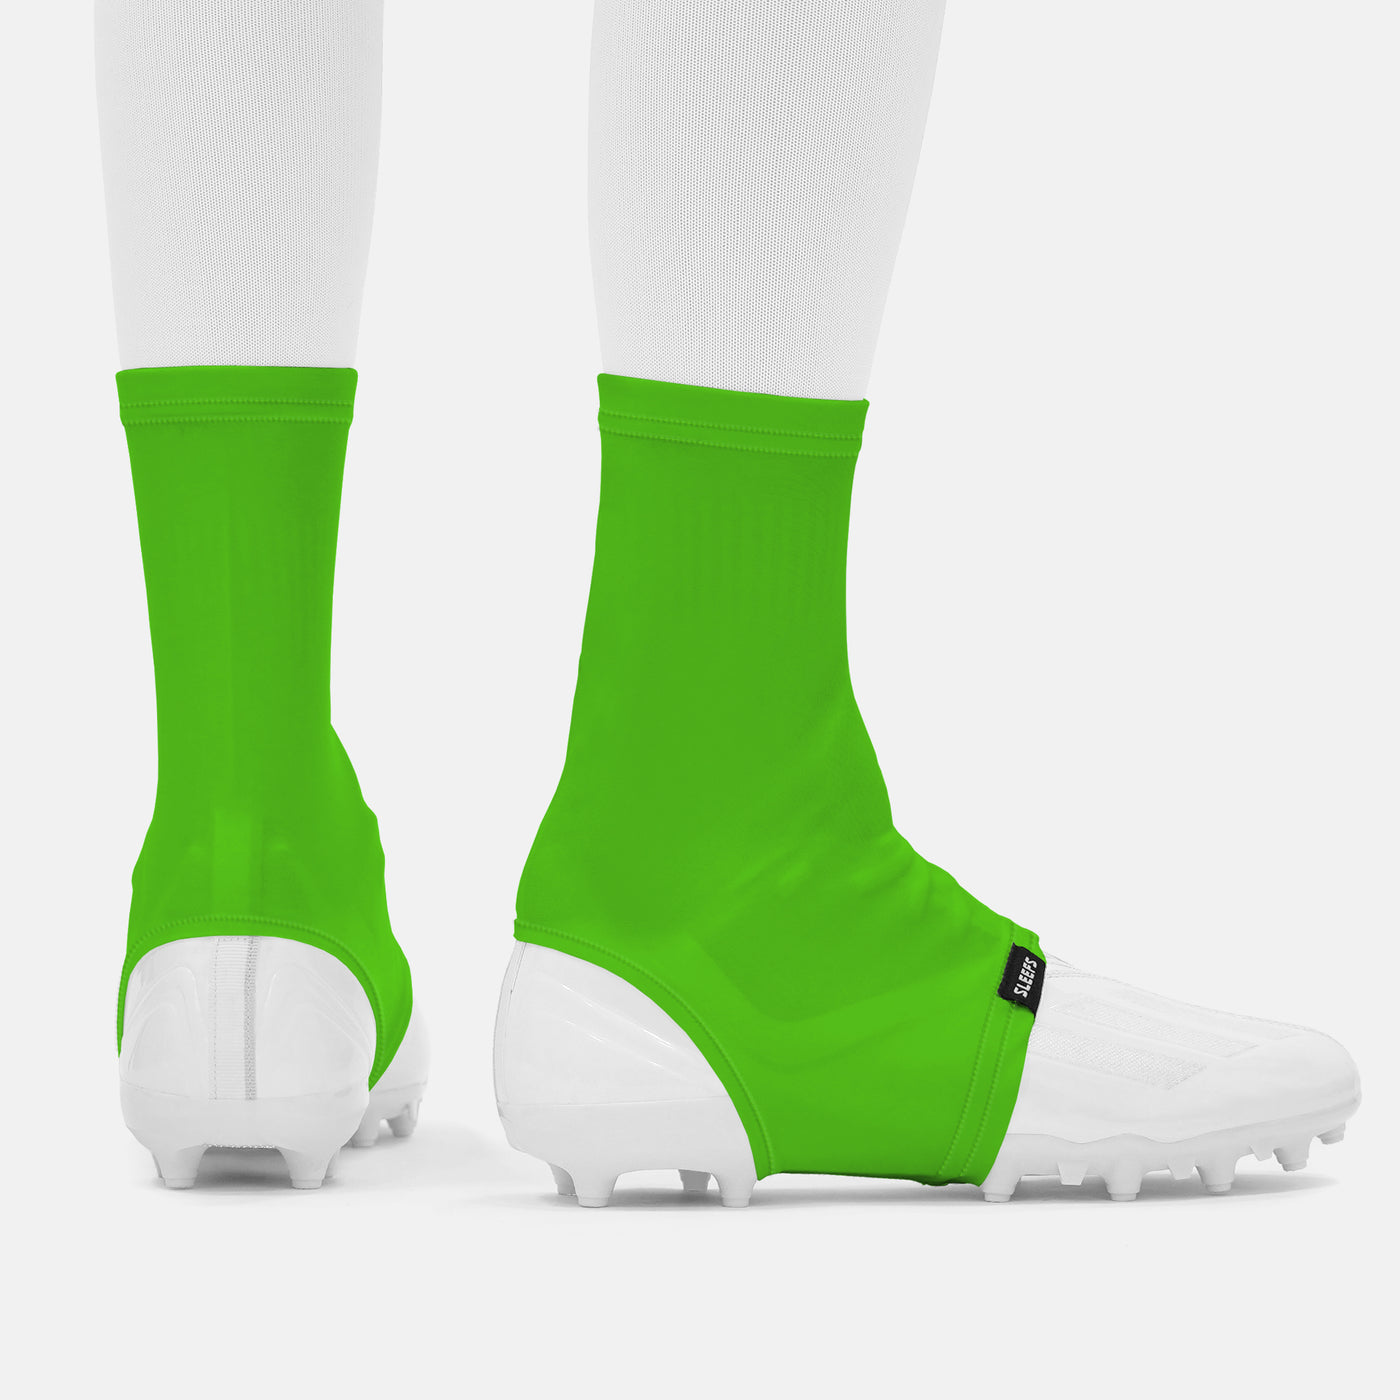 Lizard Green Spats / Cleat Covers